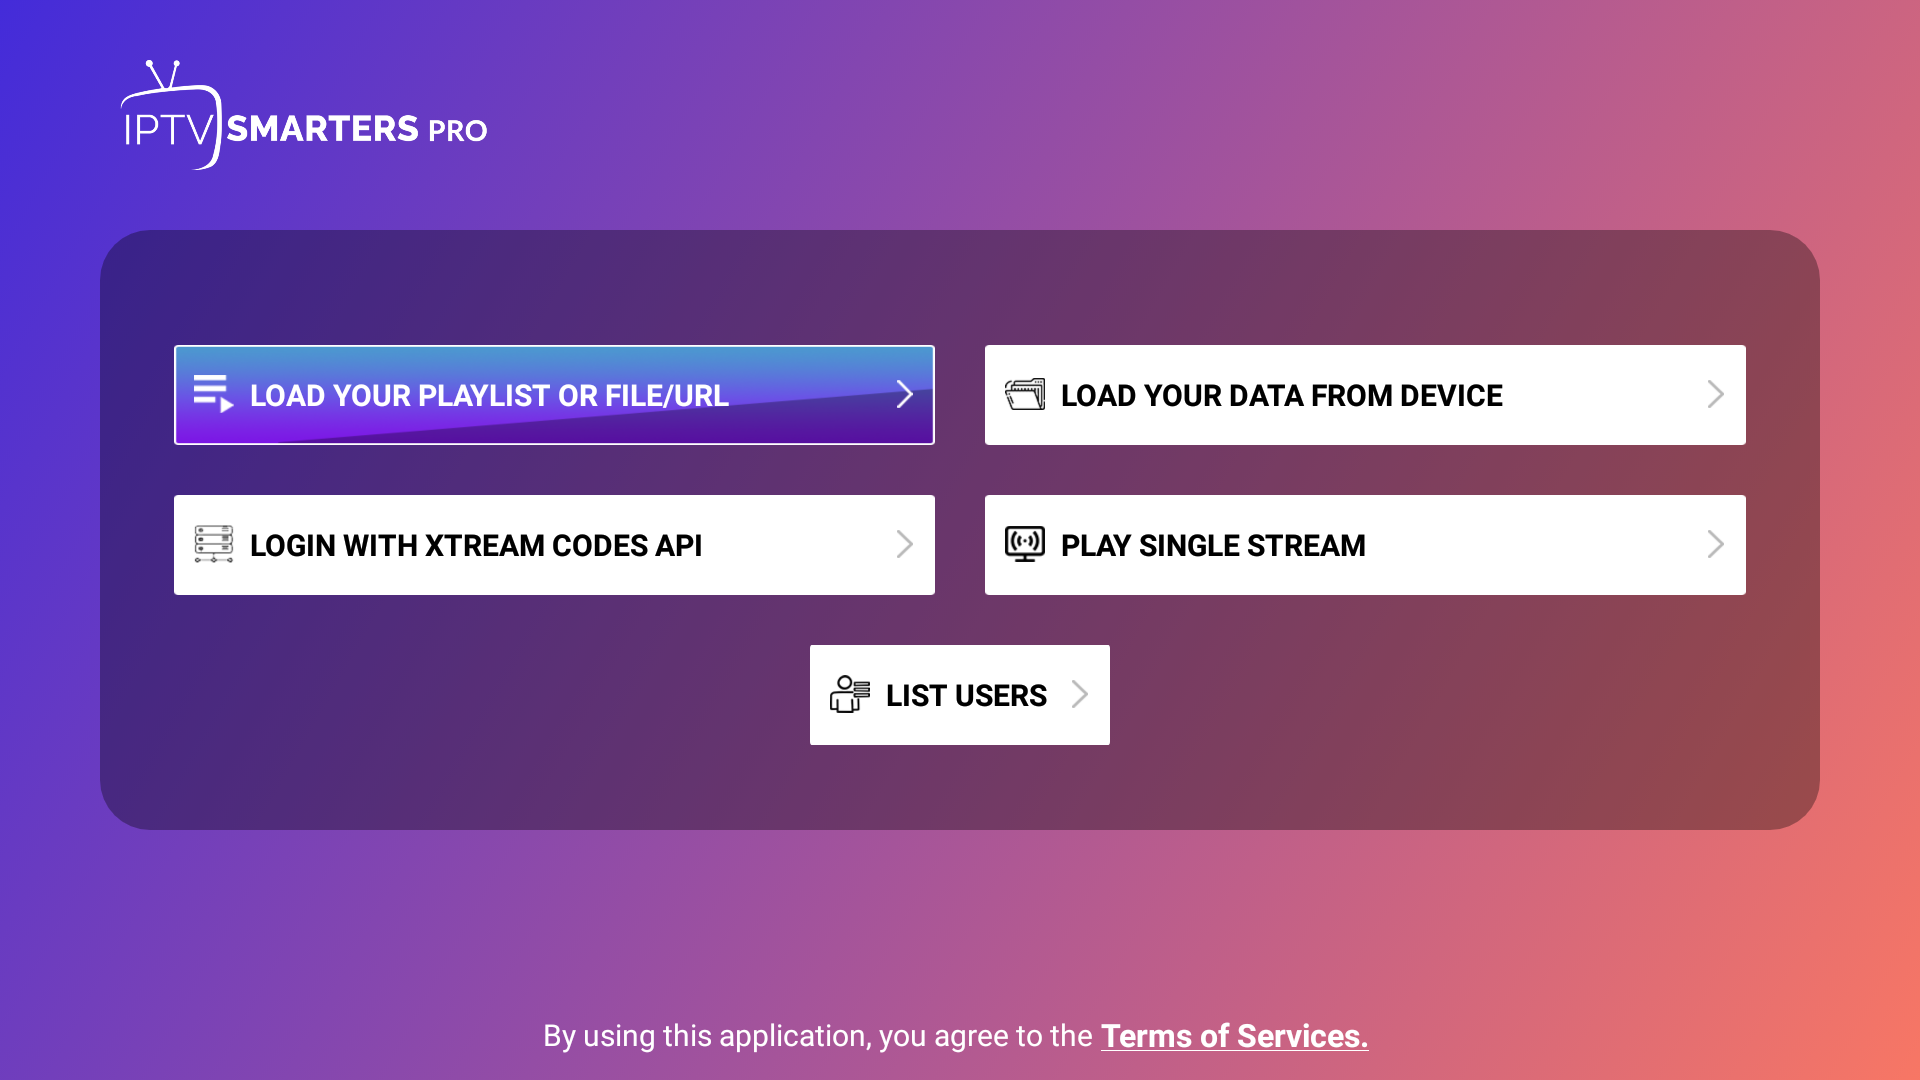 2. SMARTERS SELECT LOAD YOUR PLAYLIST OPTION